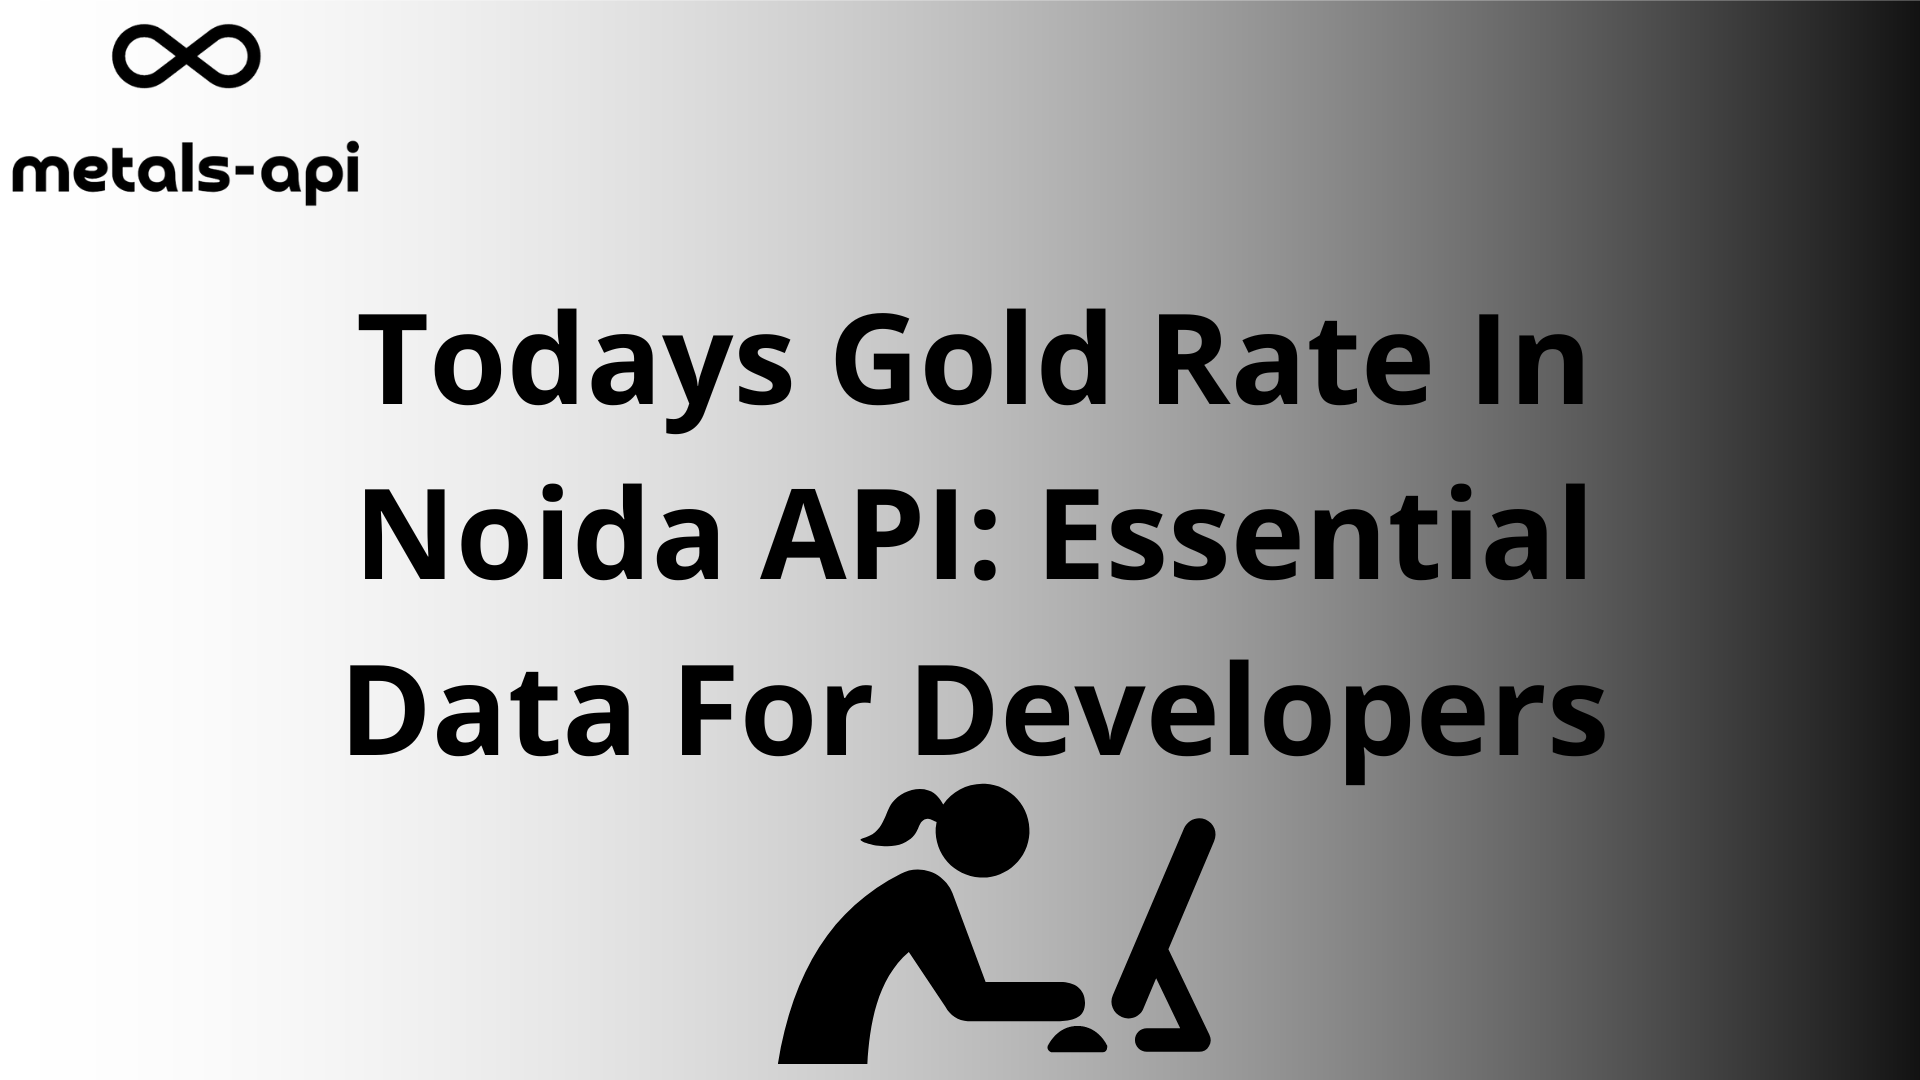 Todays Gold Rate In Noida API: Essential Data For Developers